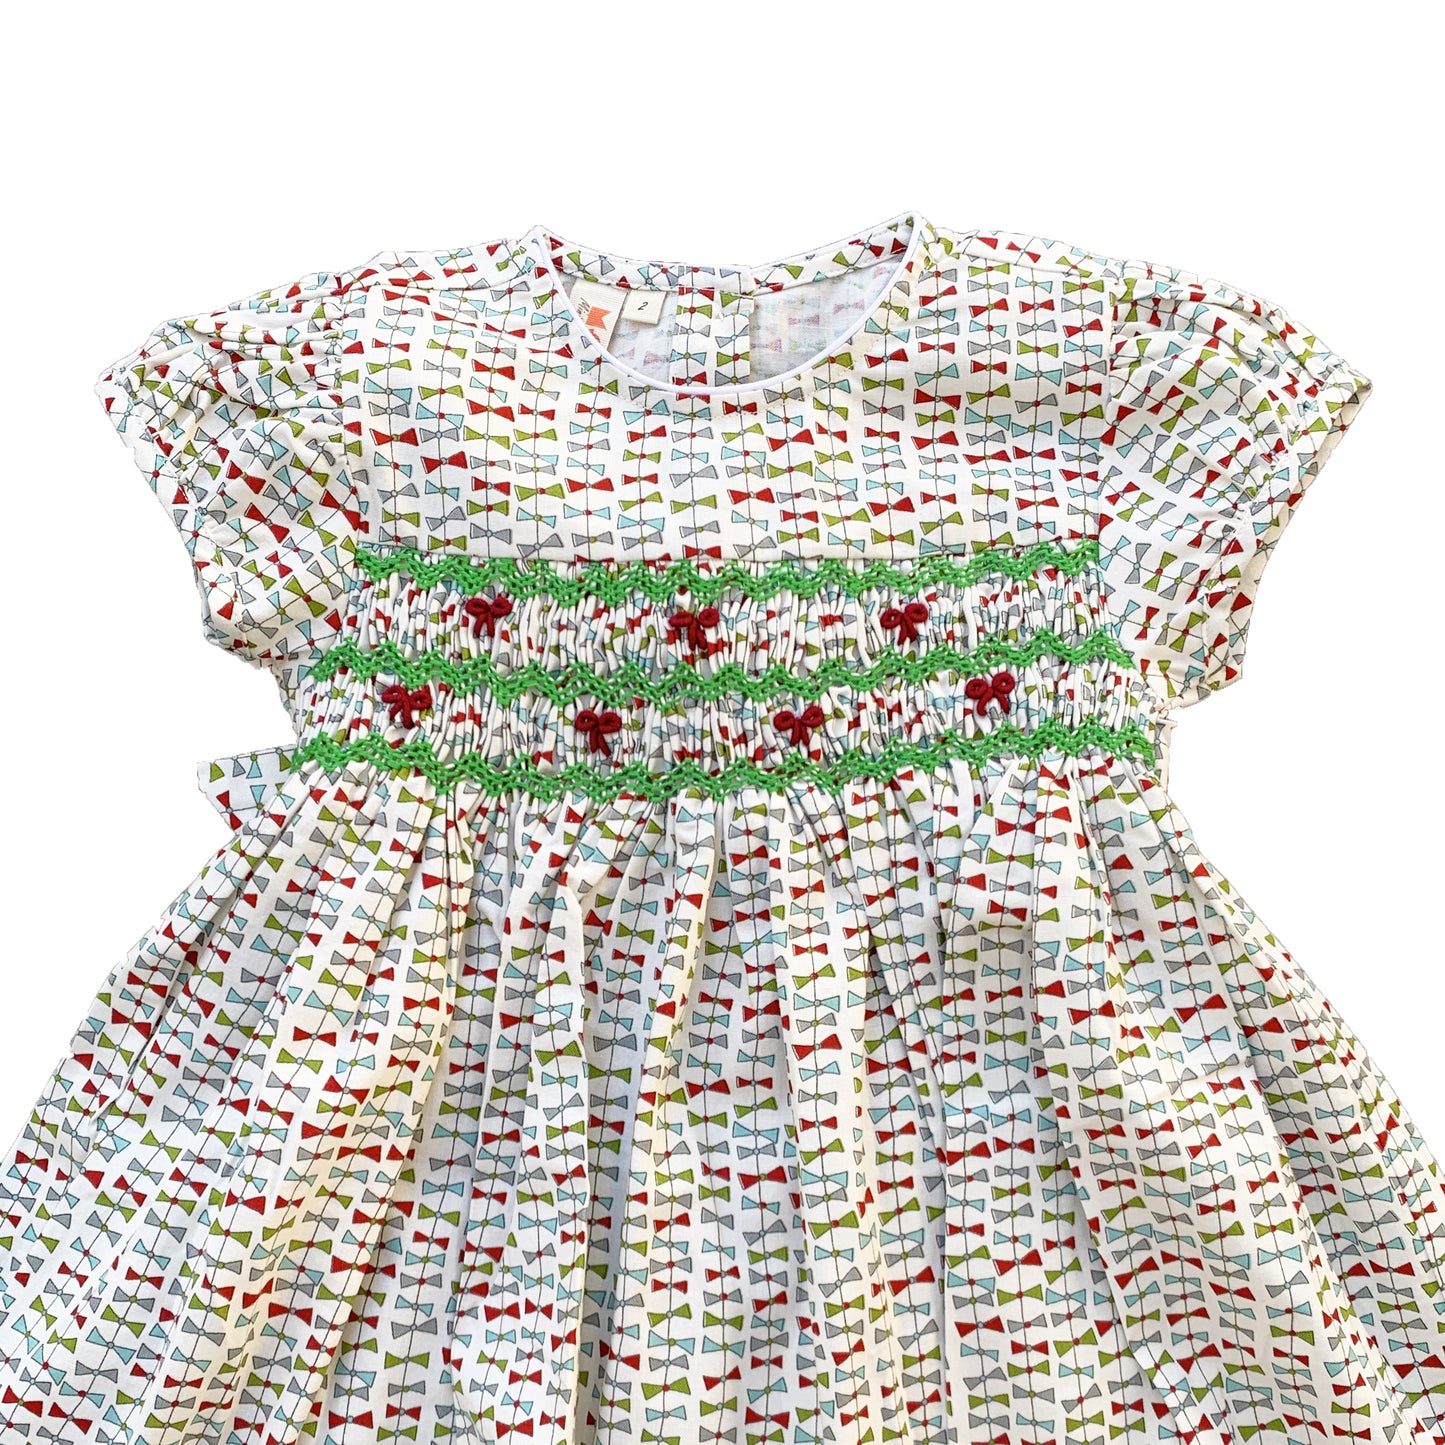 Colorful Bows Smocked Dress